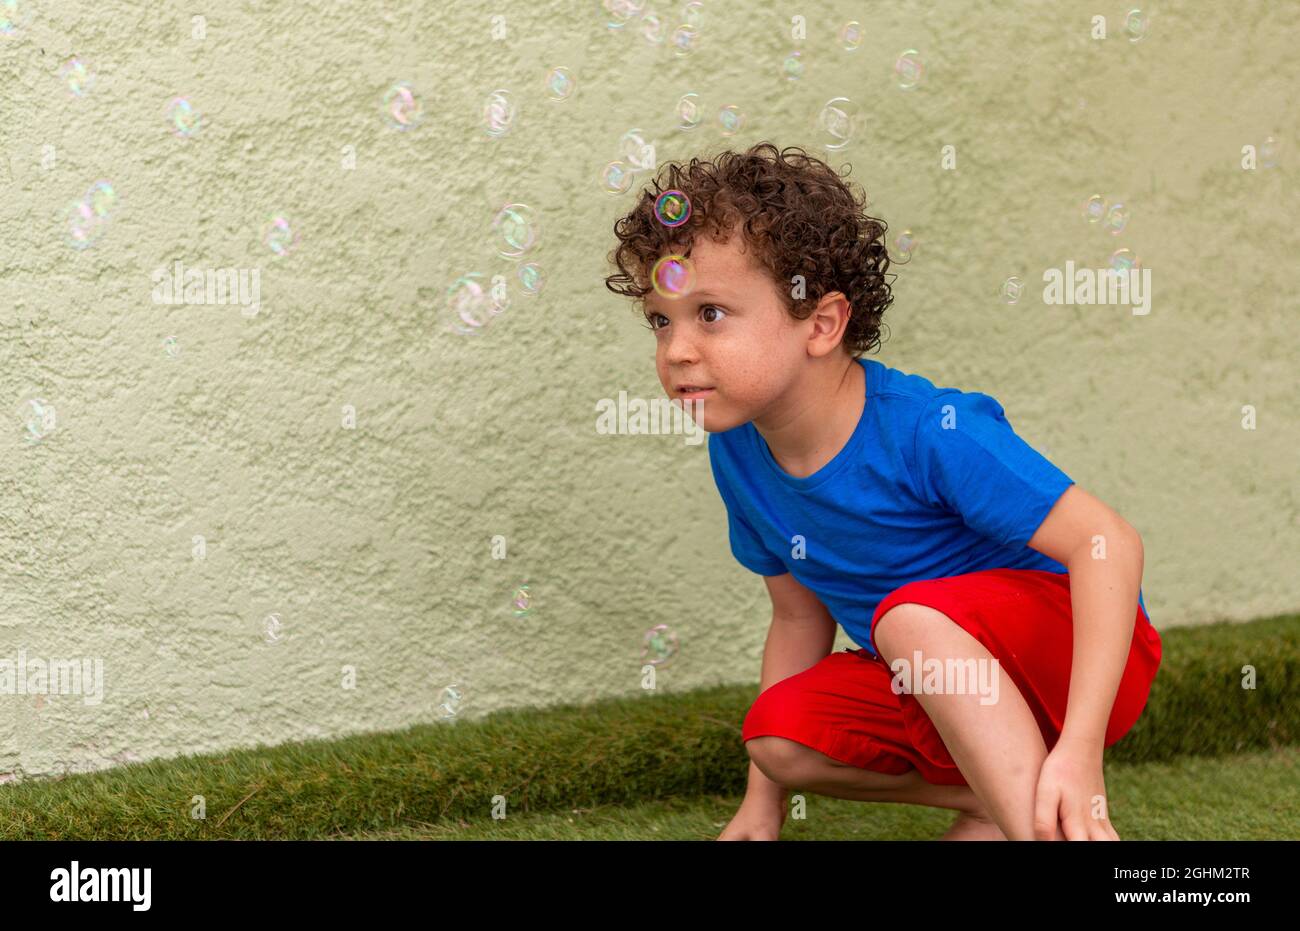 curly-haired boy with freckles playing in the backyard with soap bubbles. Stock Photo